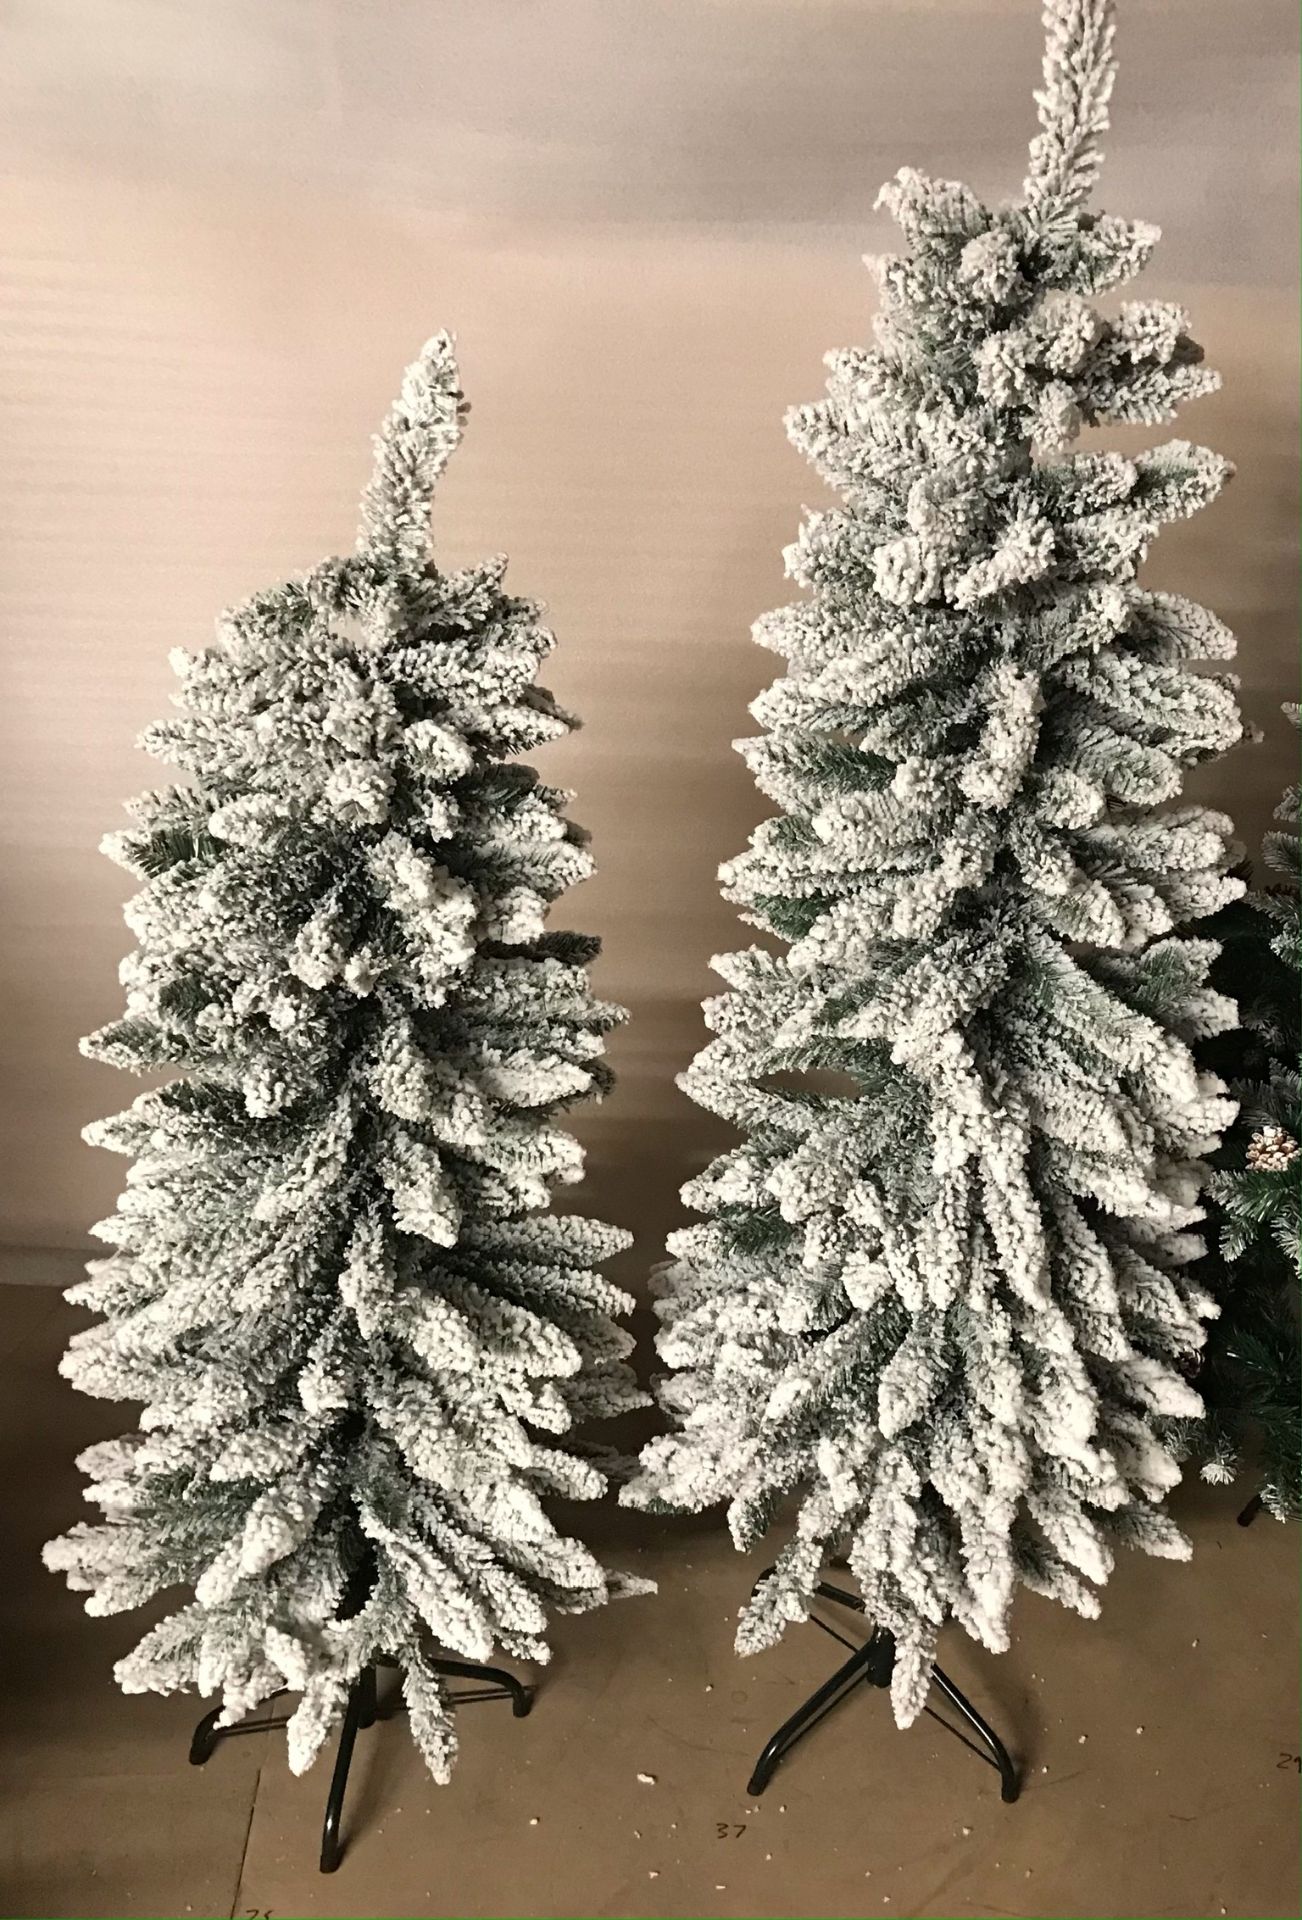 4 x 5ft Christmas Tree Artificial with Snow Frosted Tips Slim Pencil Shape - Image 2 of 2